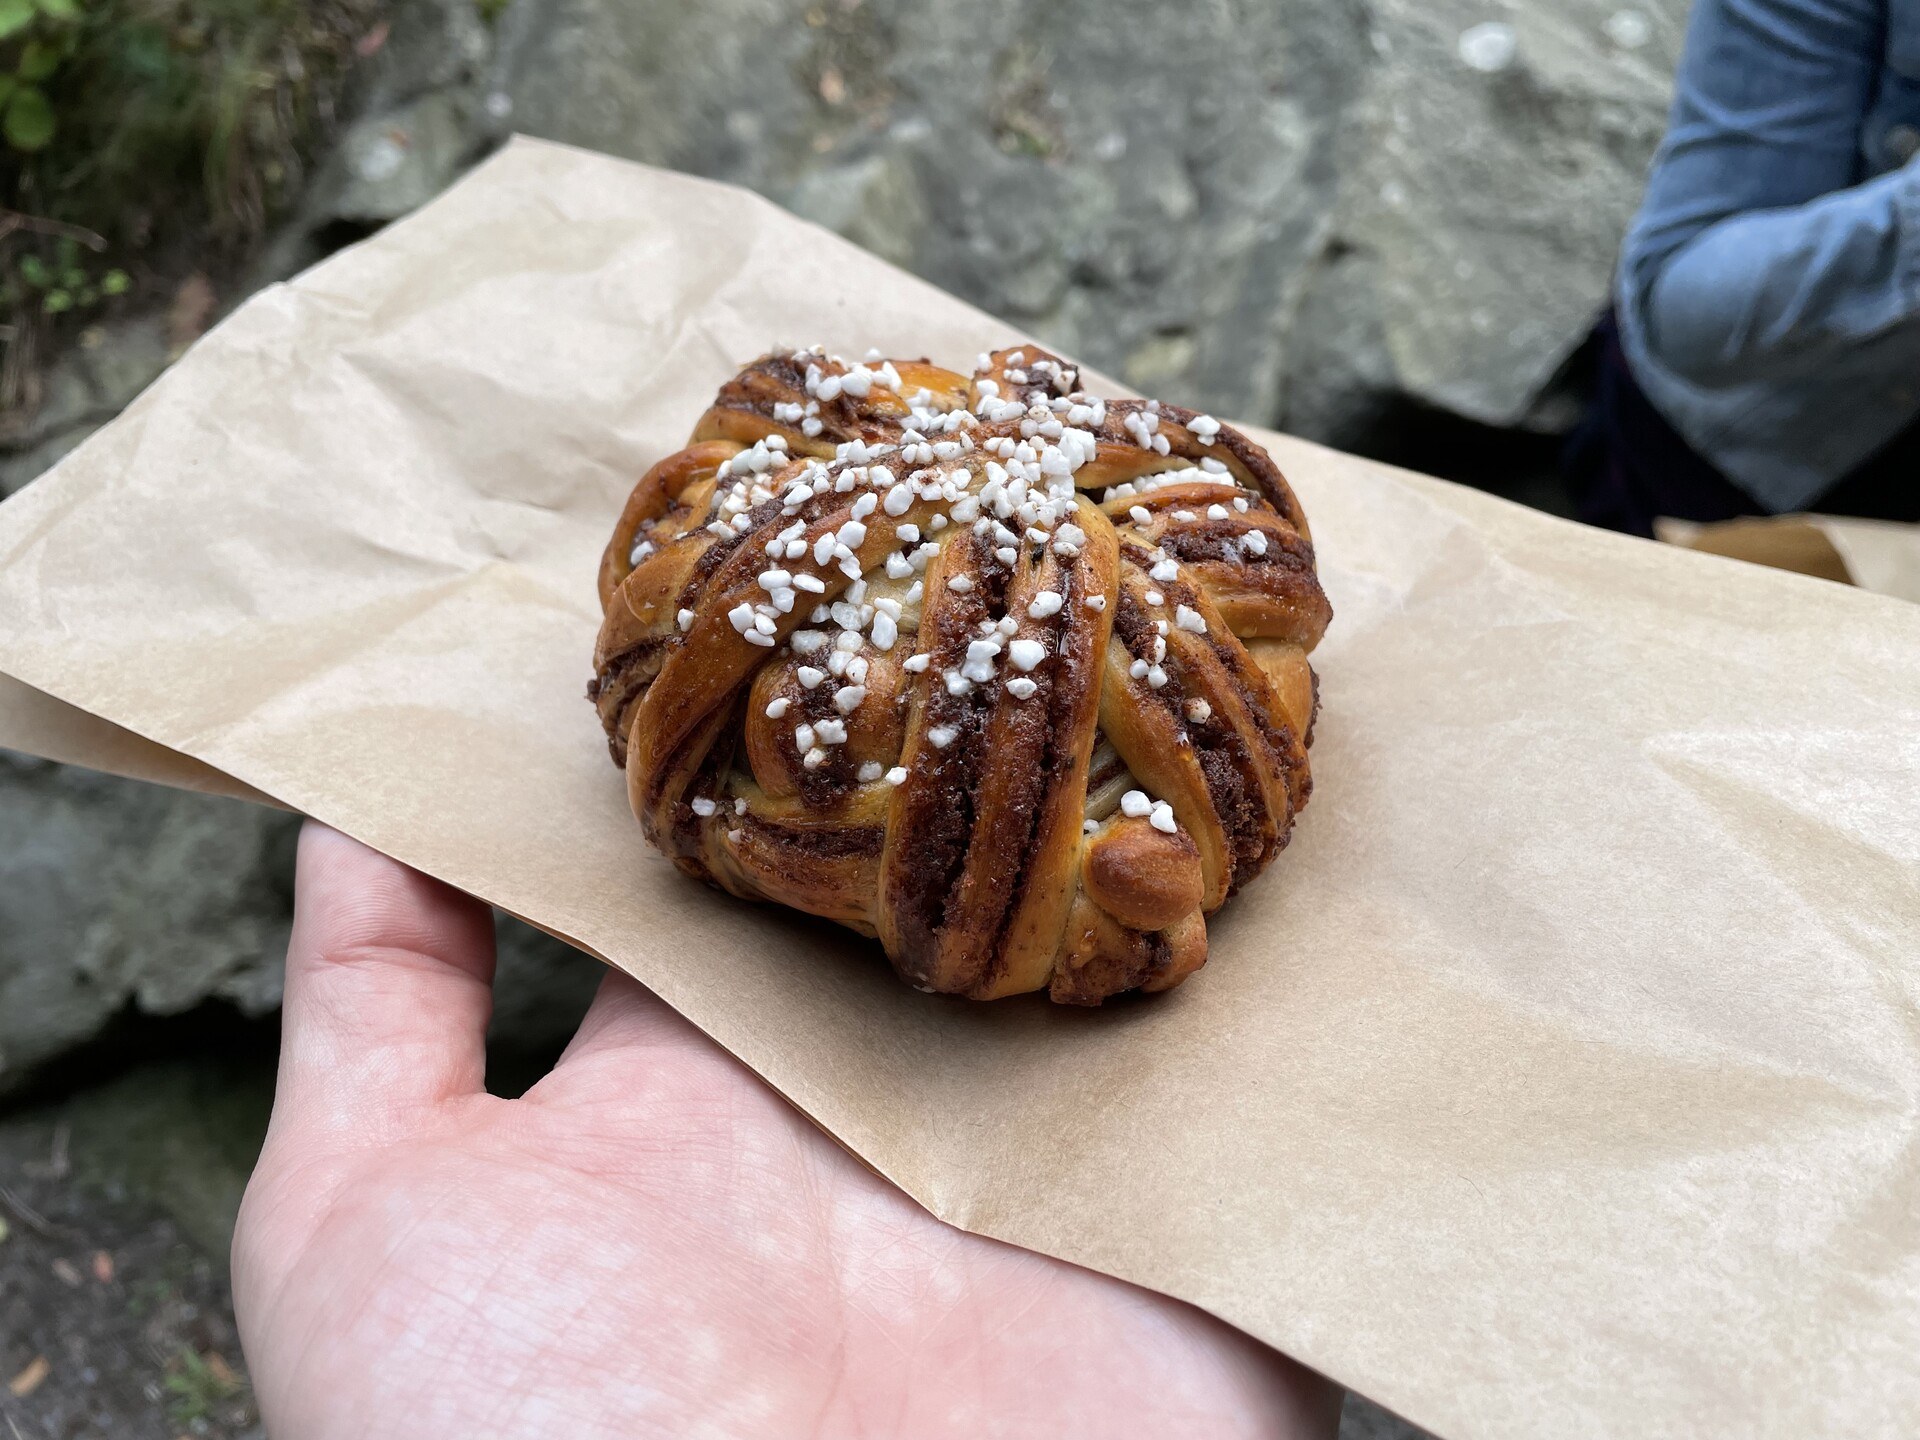 A Swedish-style cinnamon roll in the palm of my hand